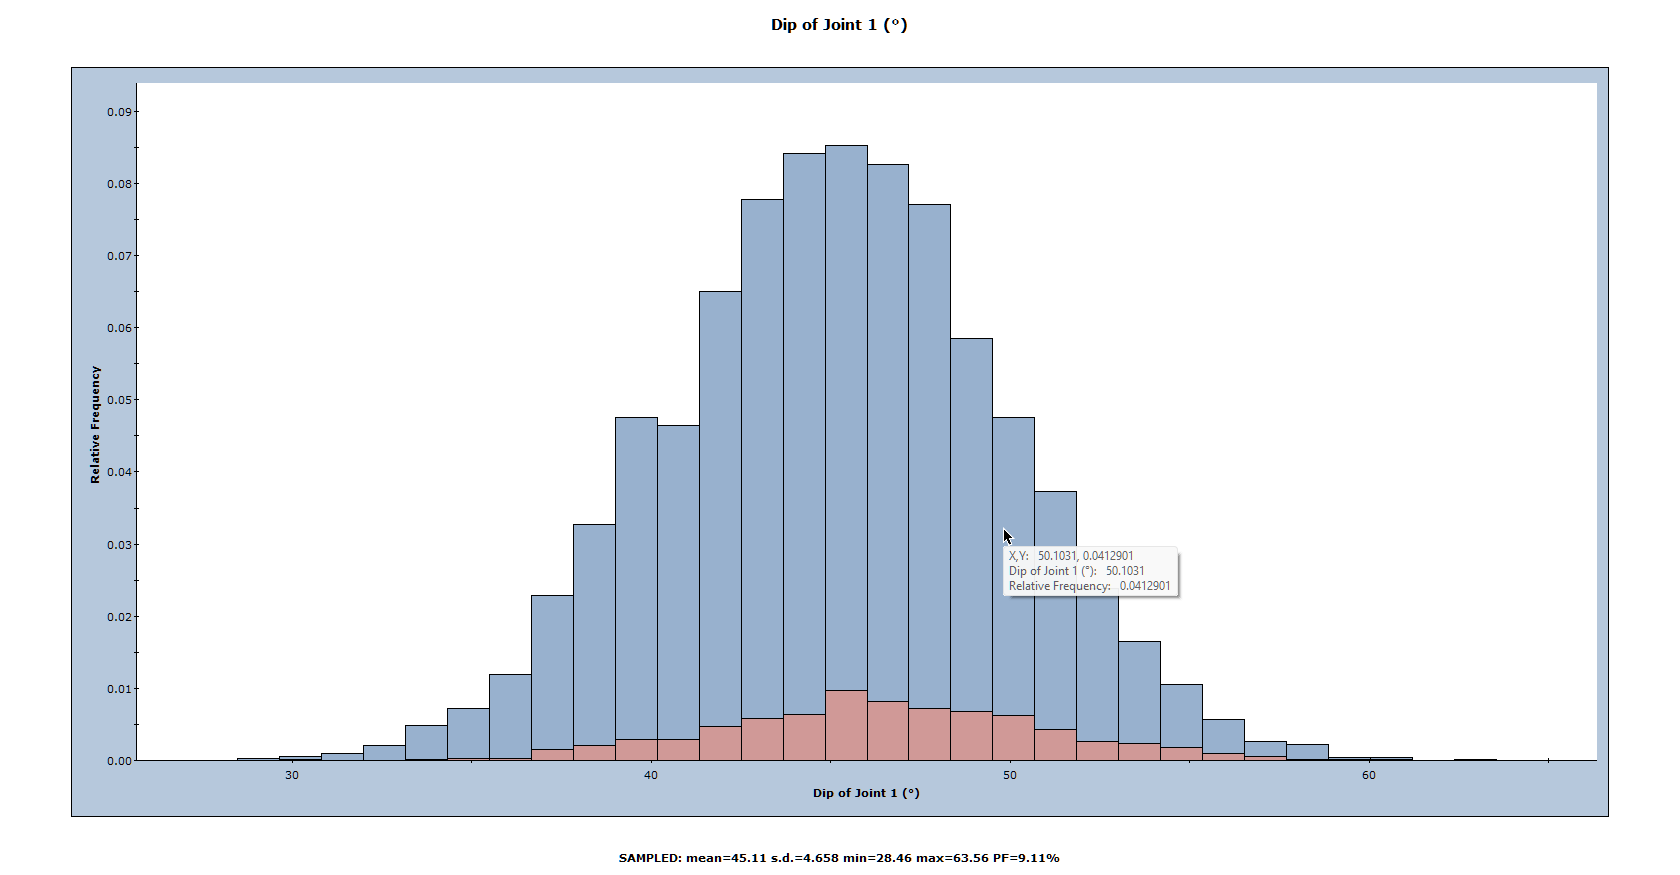 SWedge Dip of Joint 1 histogram